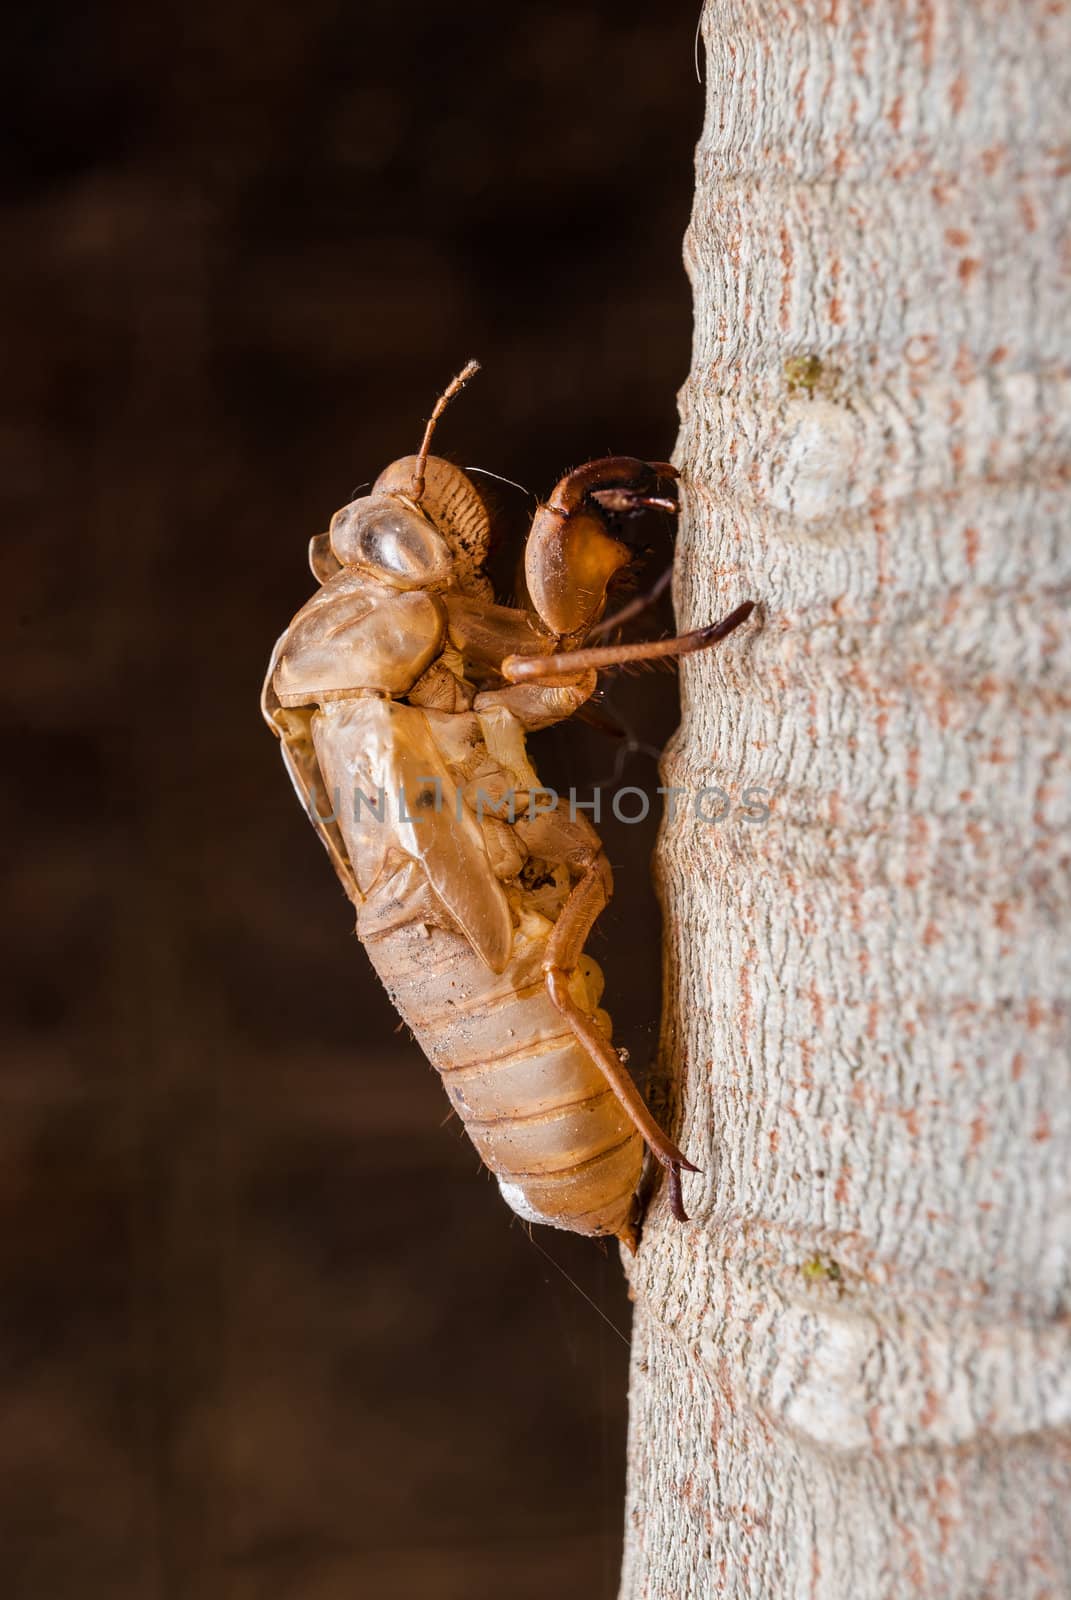 cicada slough holding on a tree